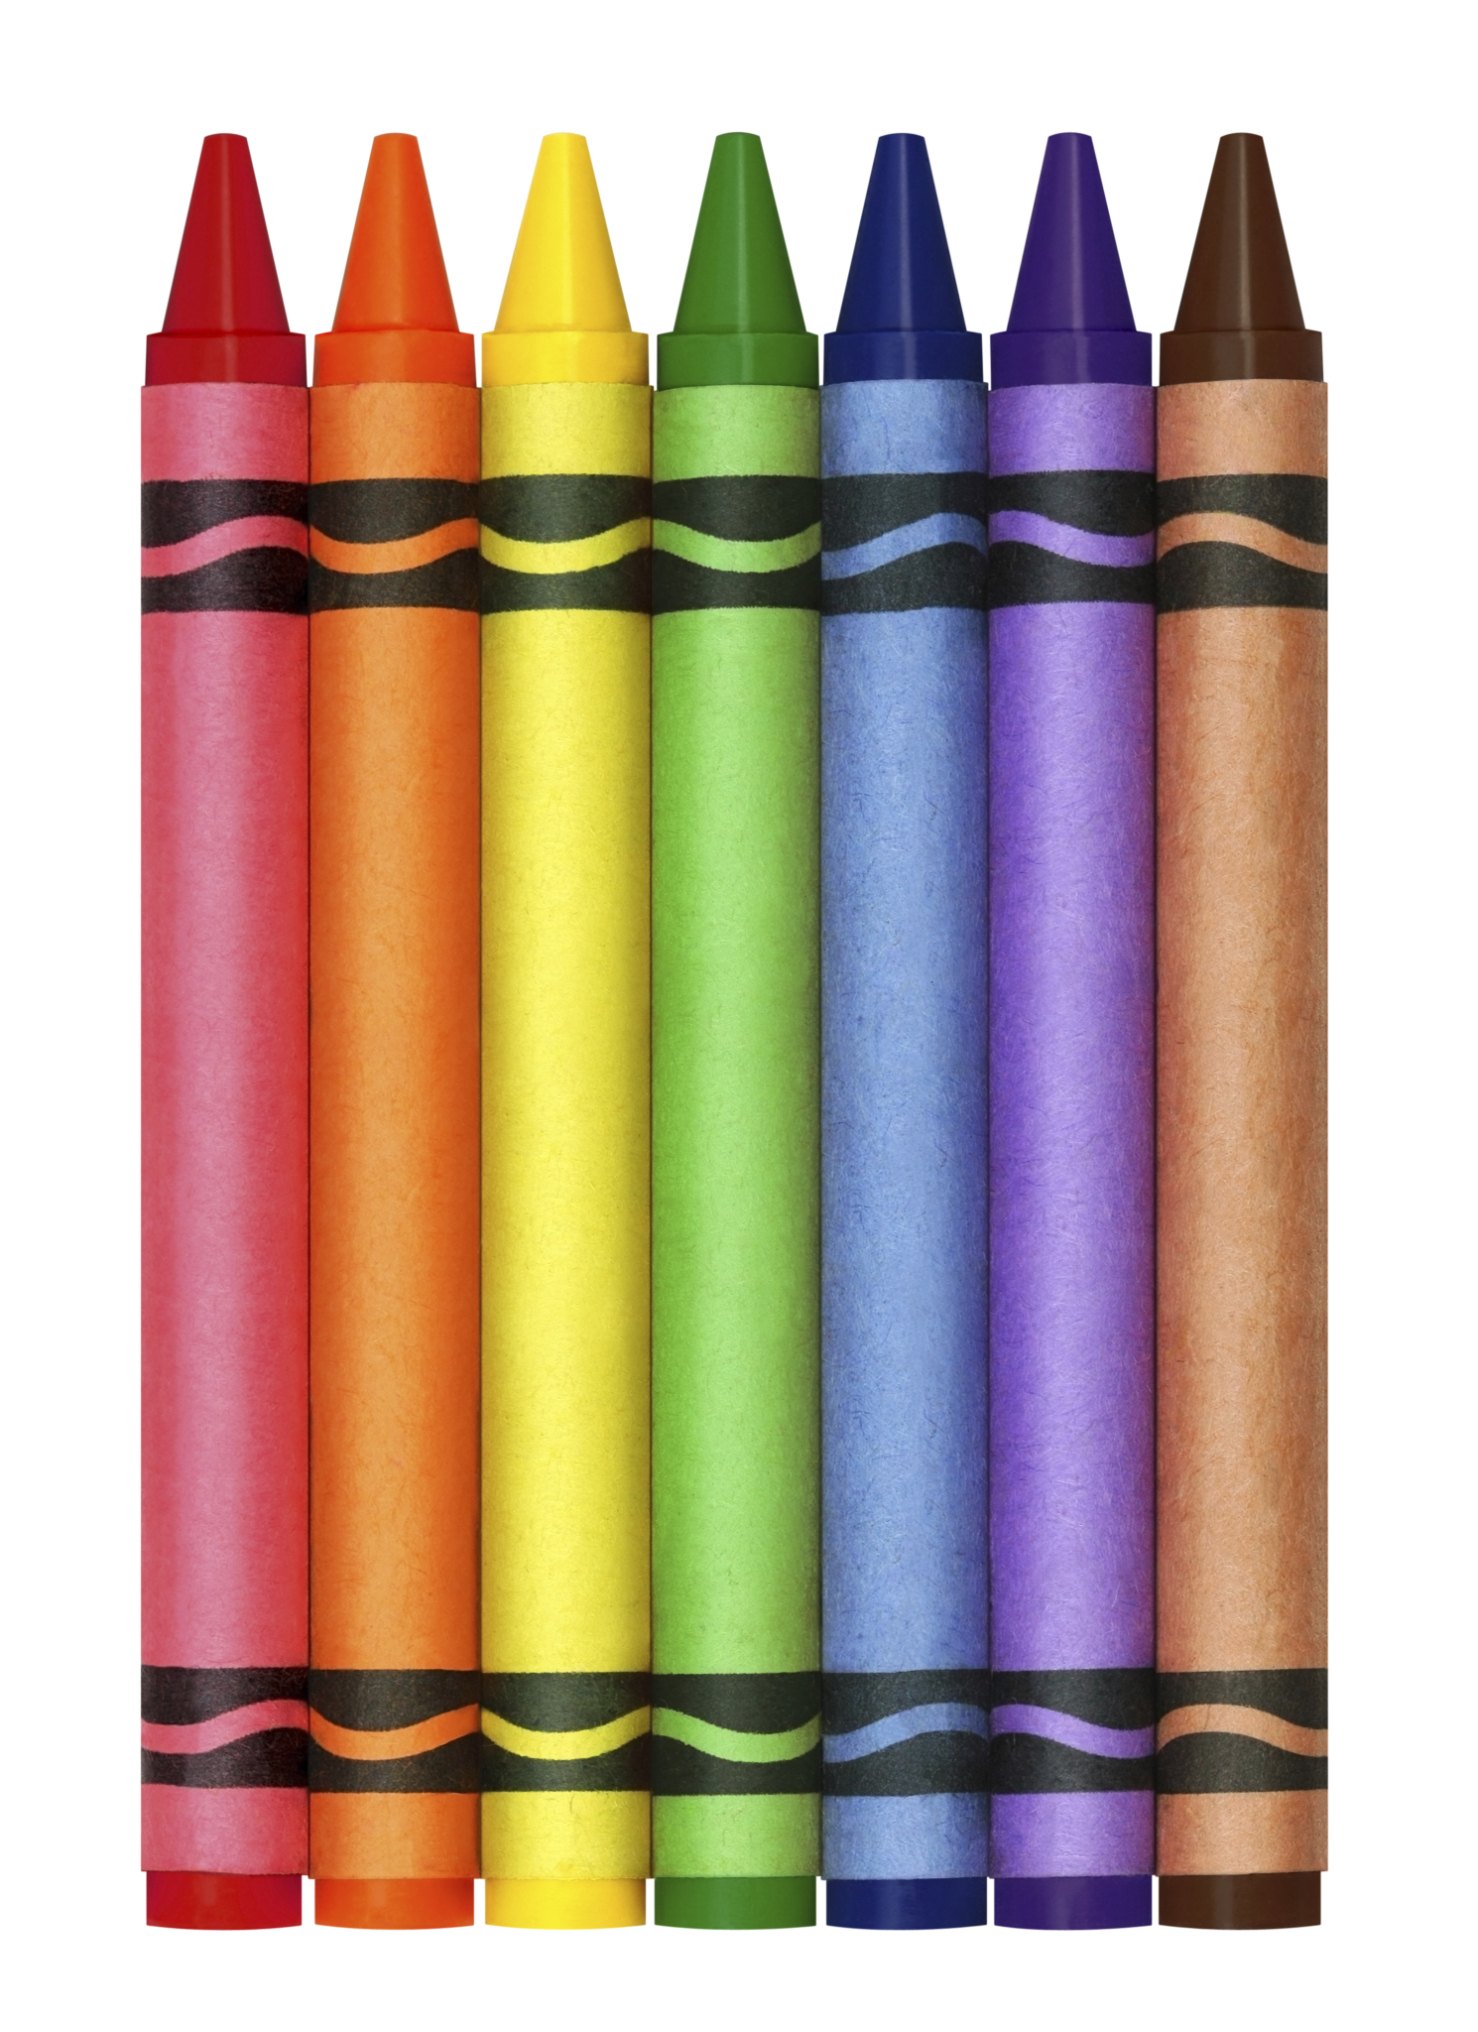 The Crayons 7